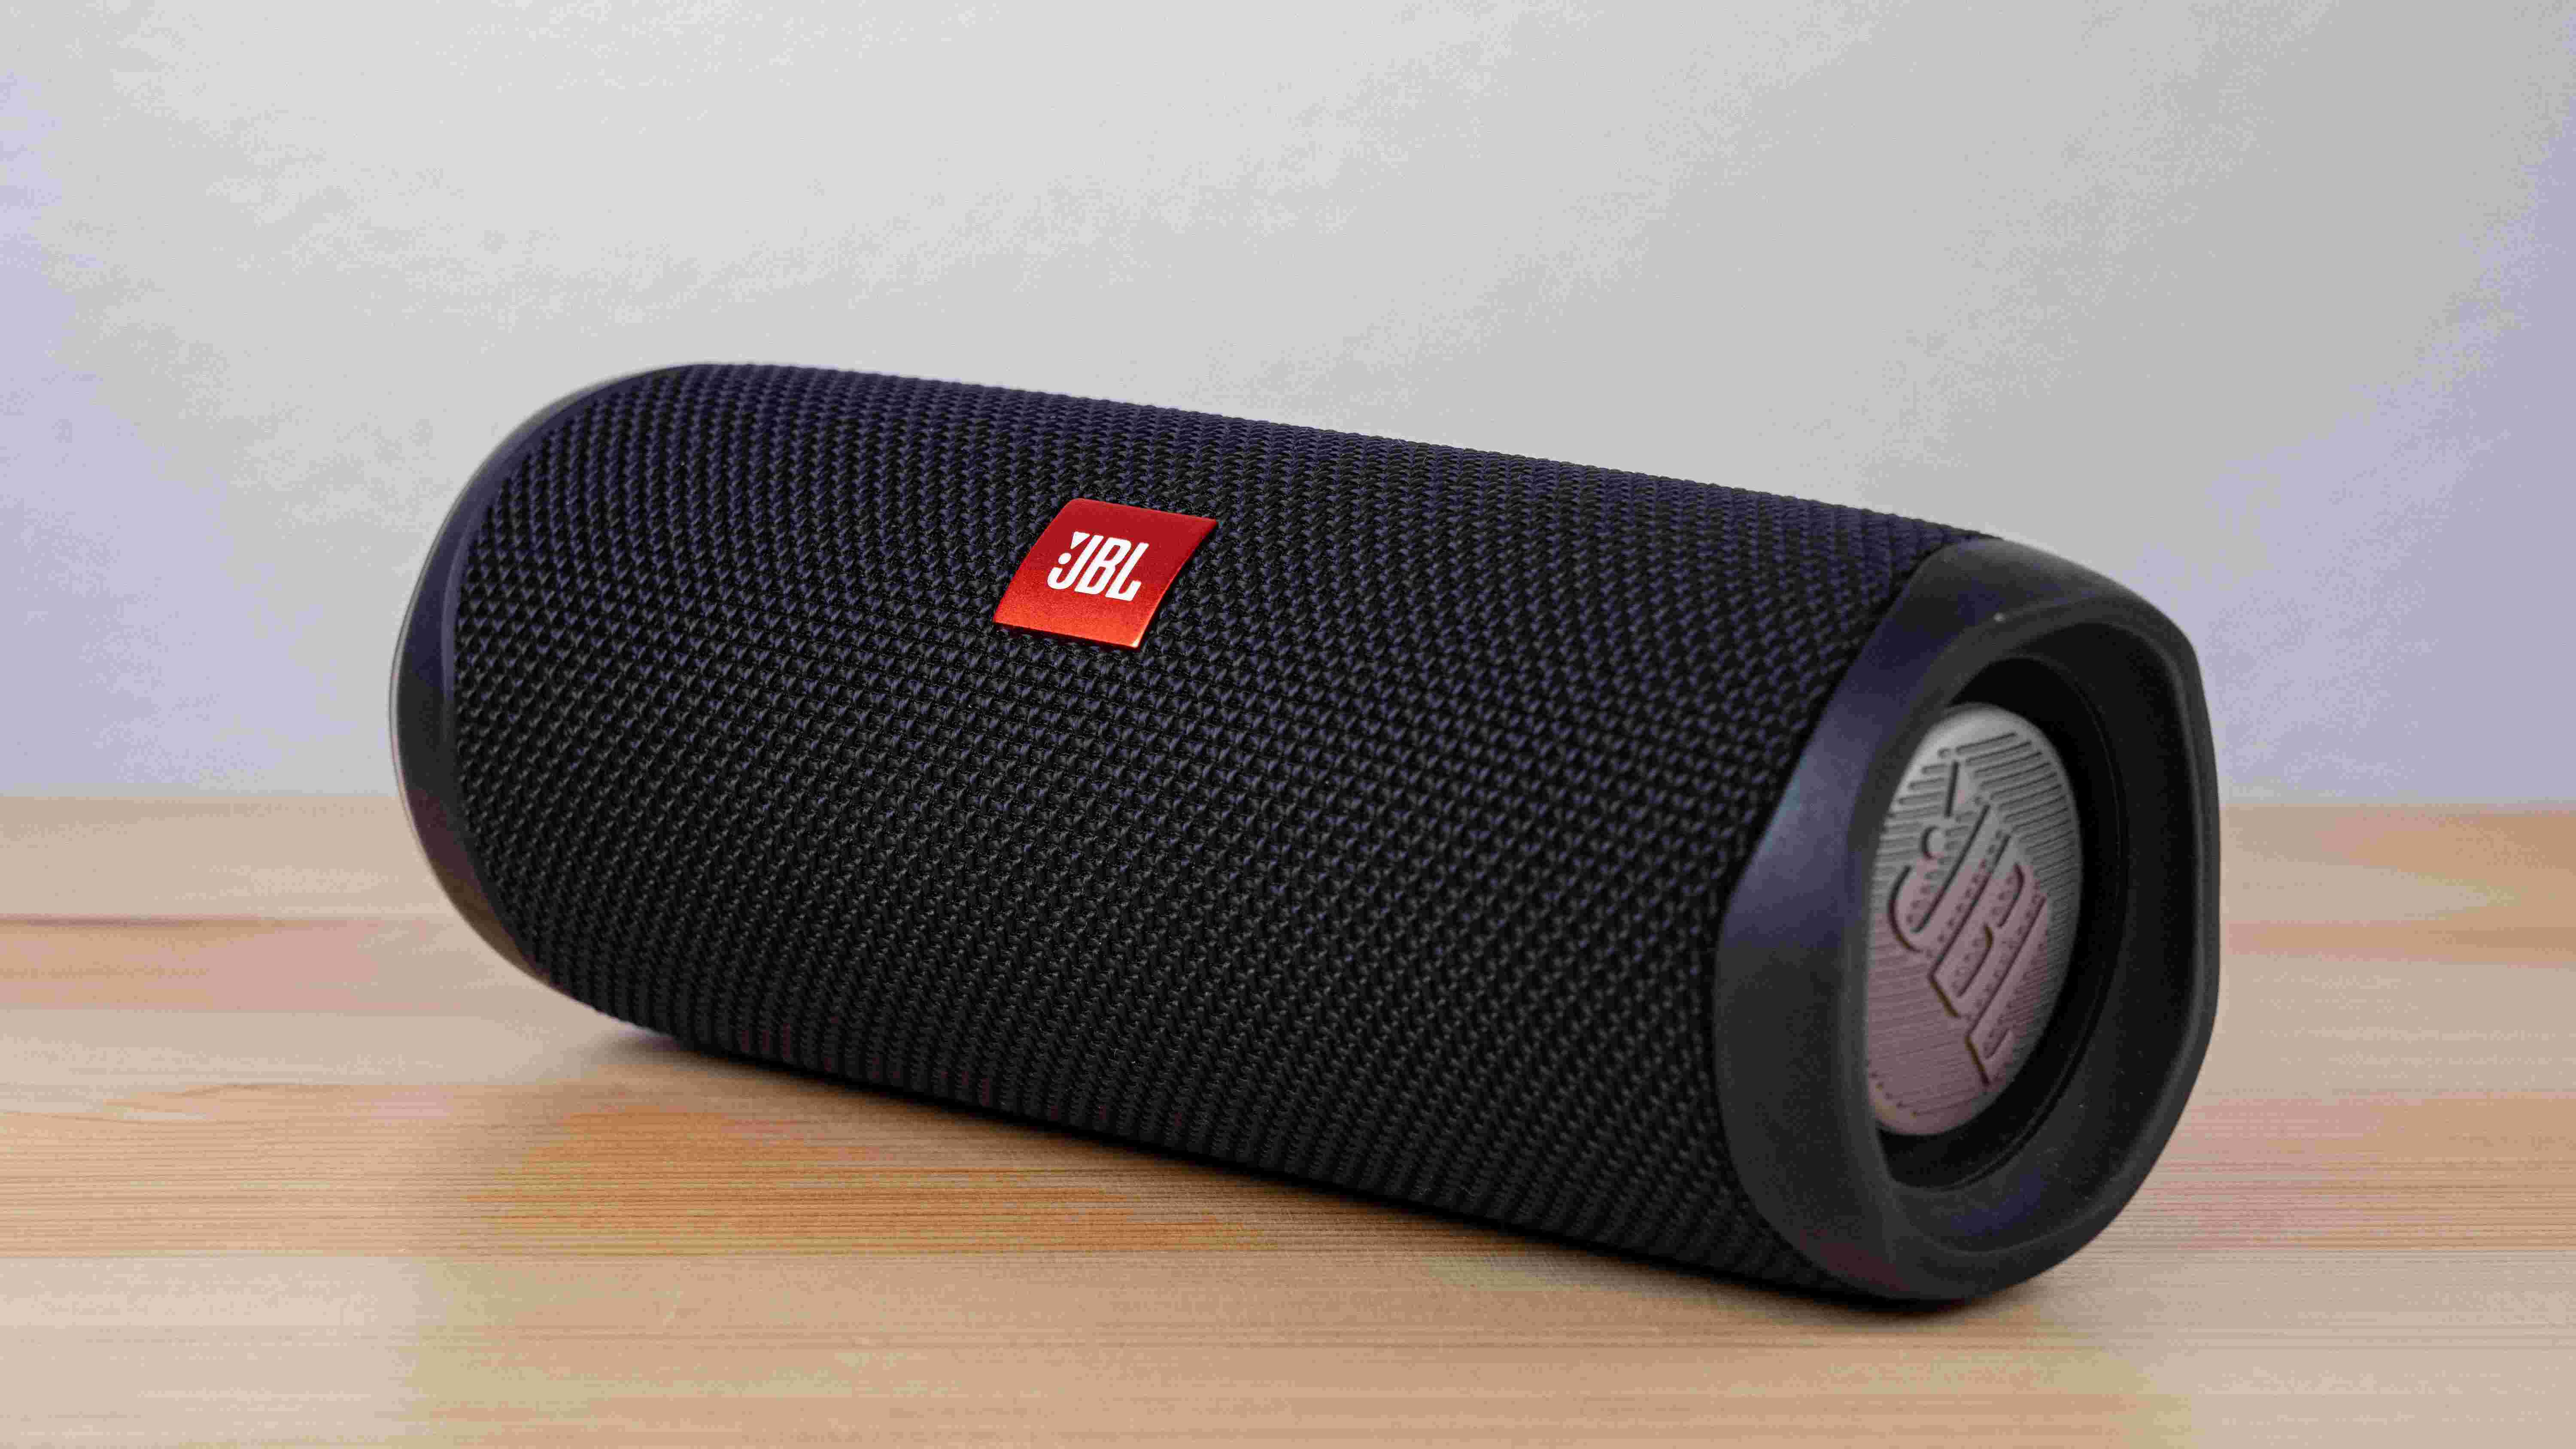  Portable Bluetooth Speaker is a safe and handy present for your musicophile husband